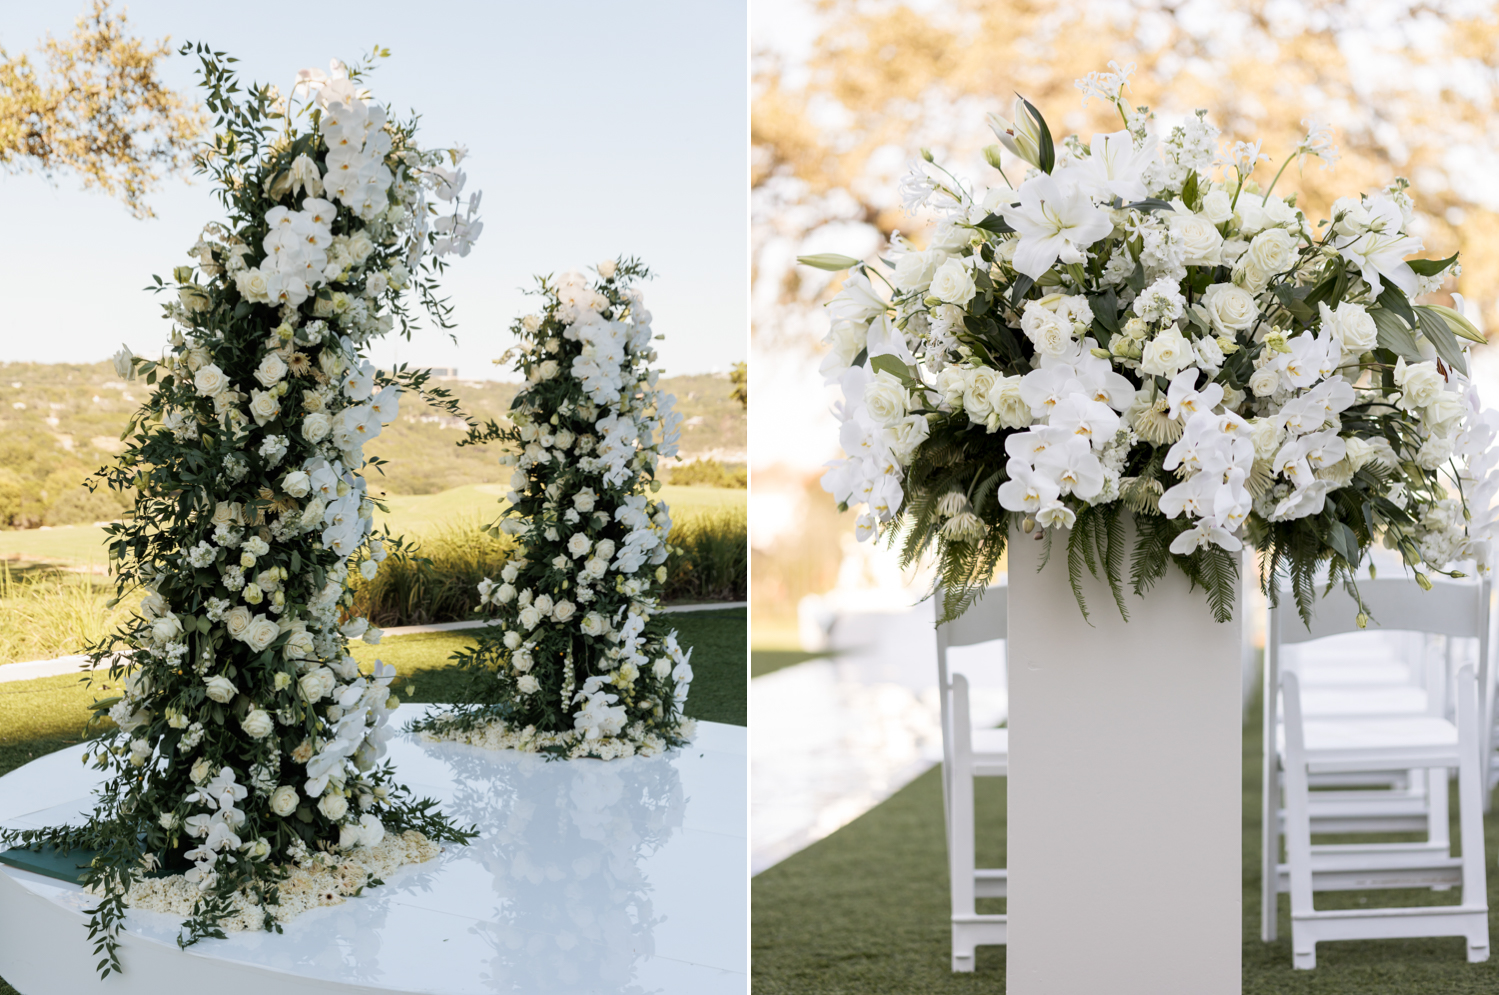 Left: The altar is covered in white flowers and greenery. Right: A flower arrangement at the start of the aisle with big white flowers and greenery